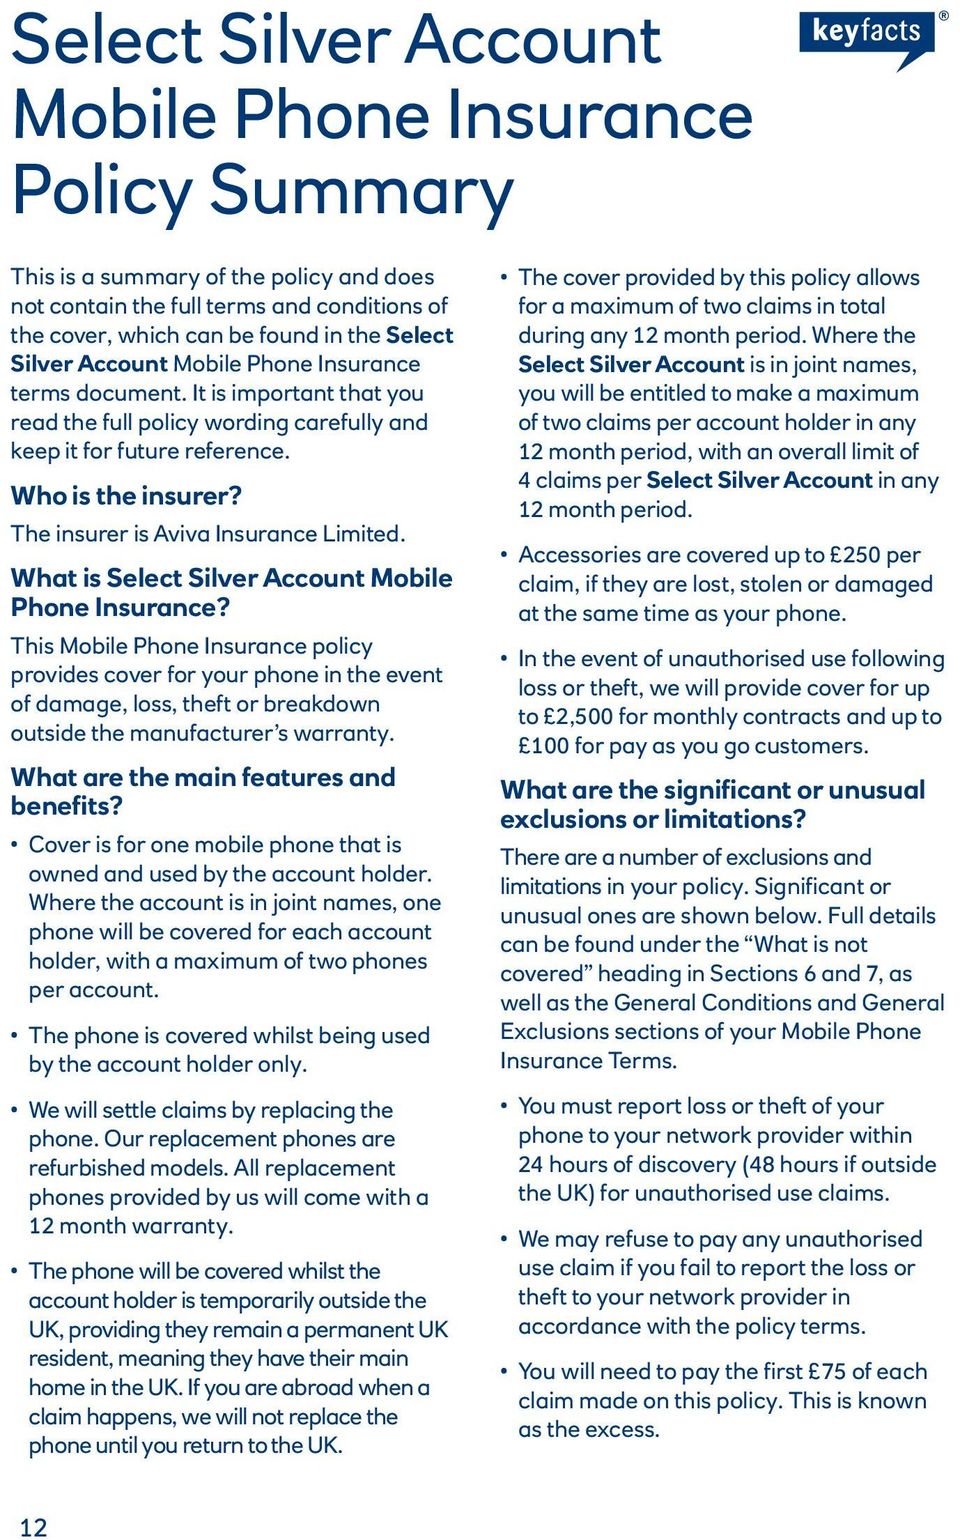 The insurer is Aviva Insurance Limited. What is Select Silver Account Mobile Phone Insurance?